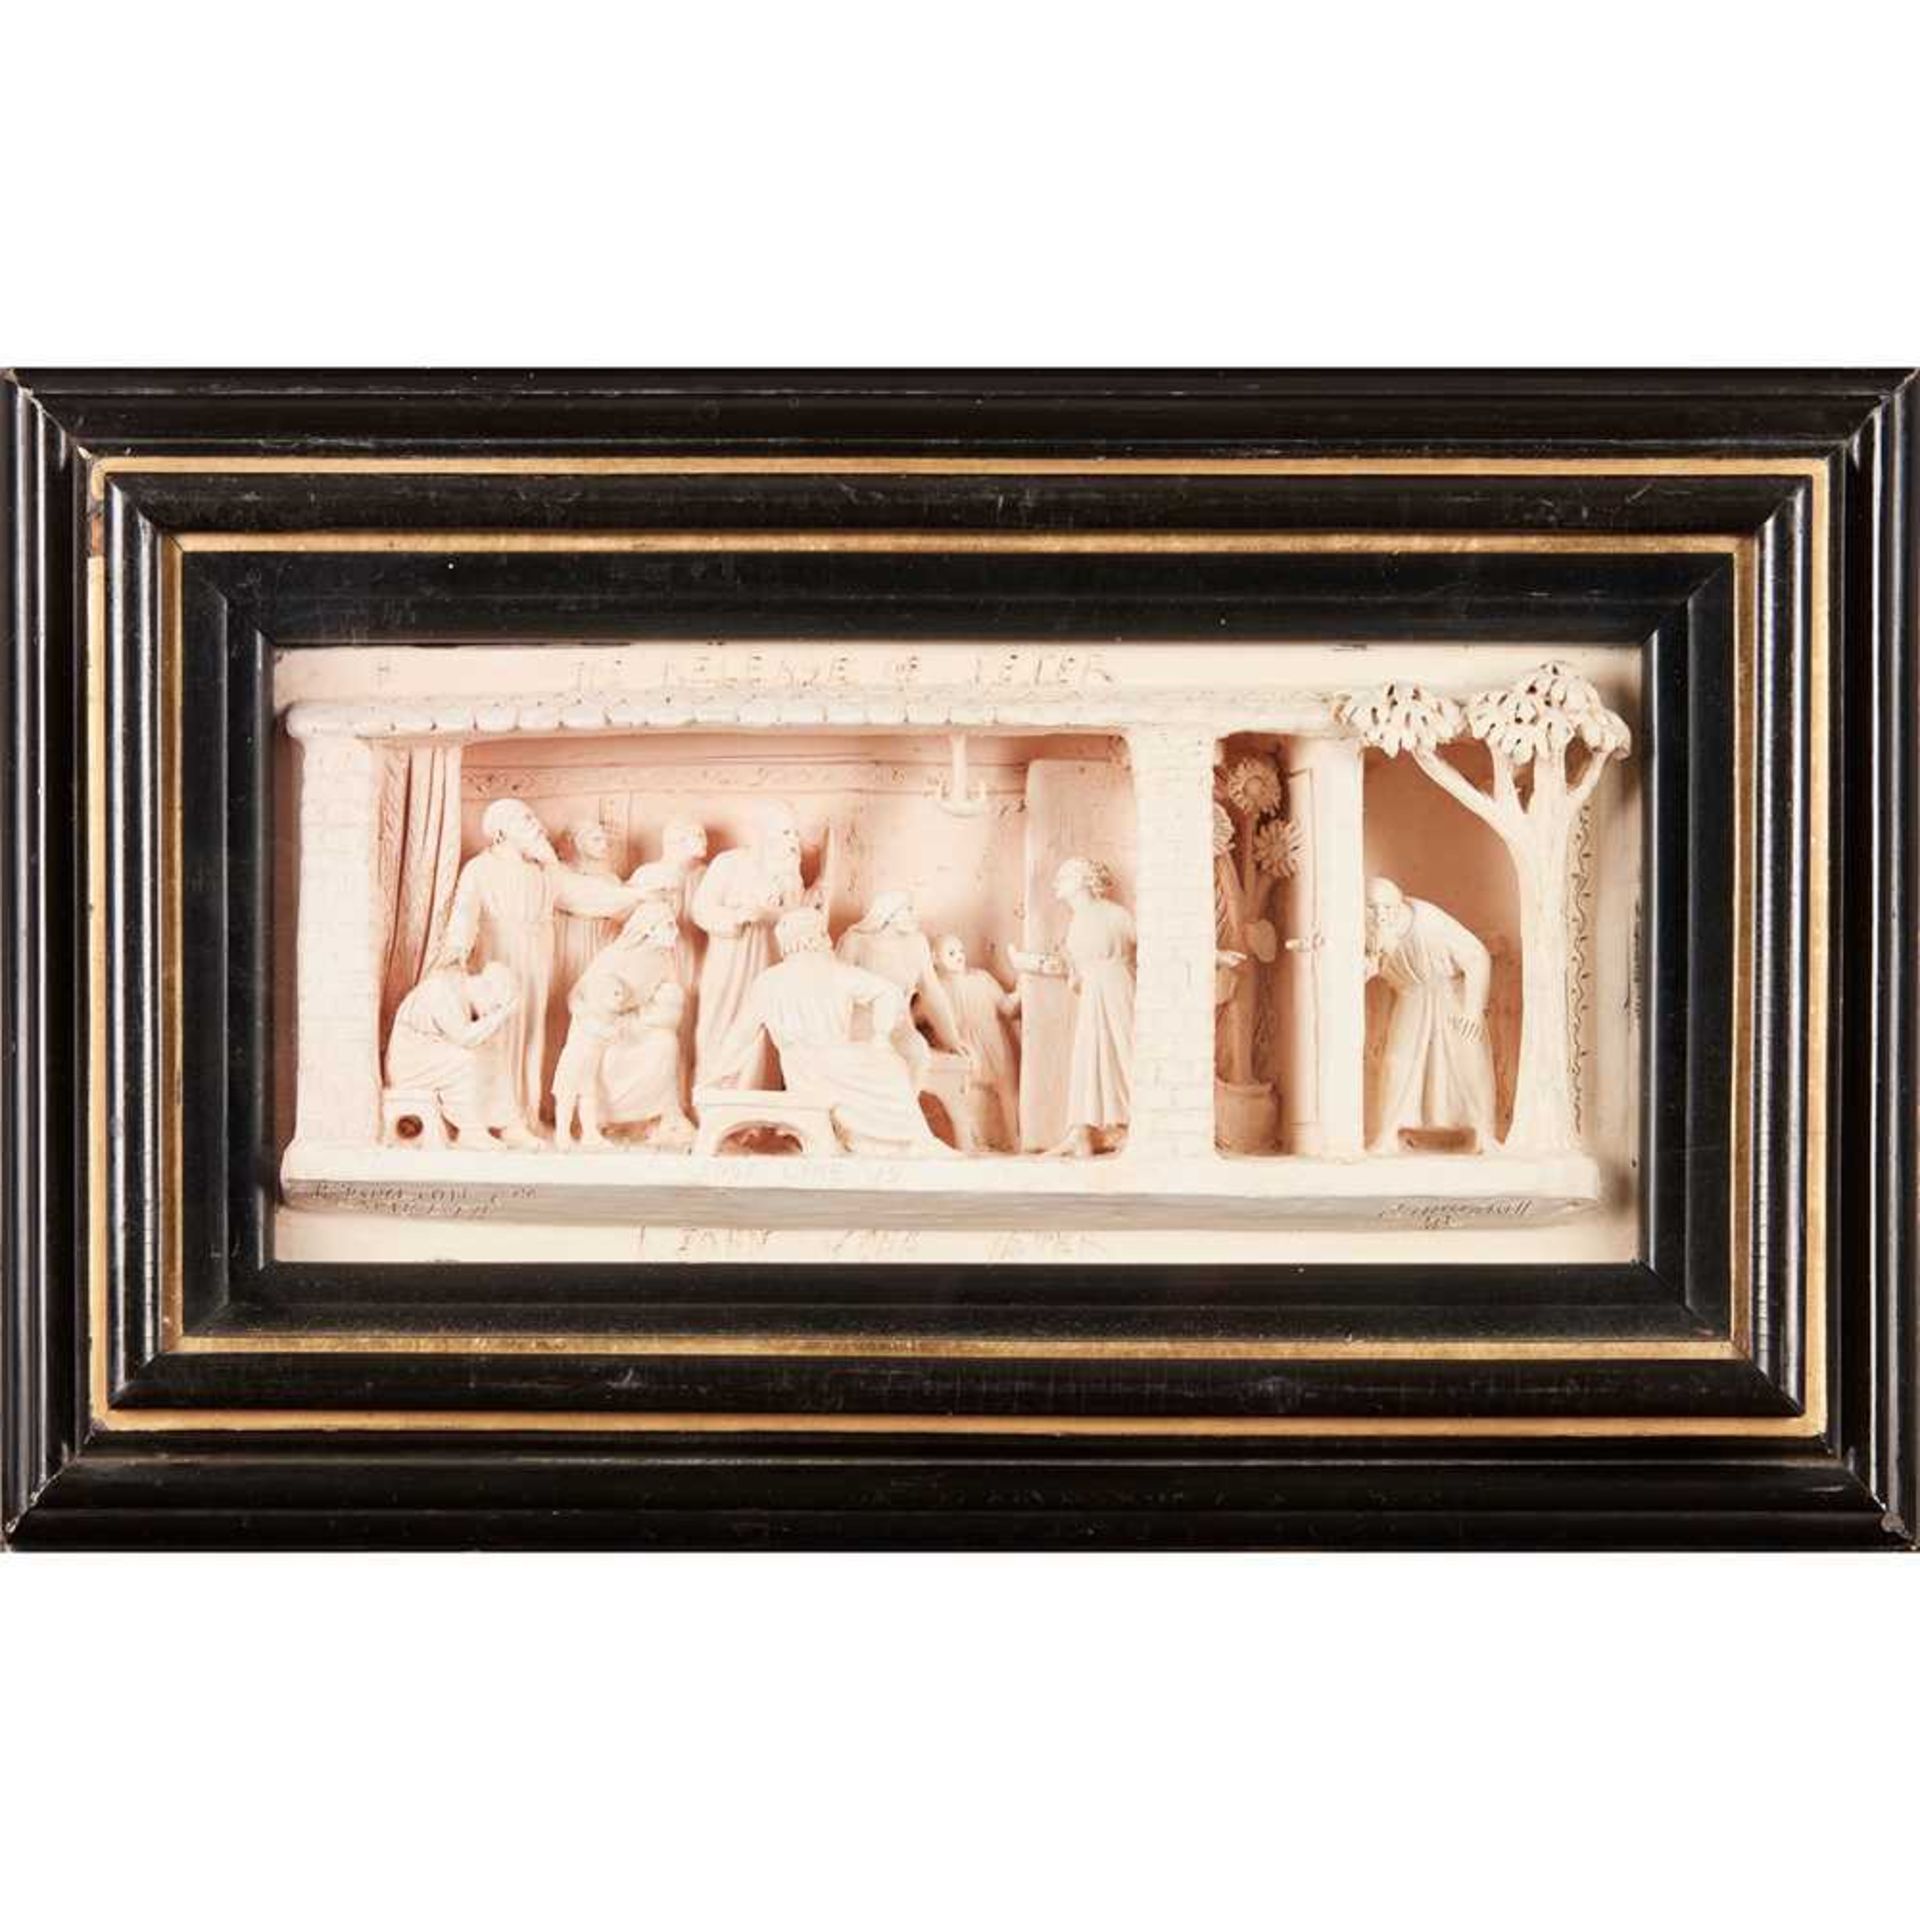 GEORGE TINWORTH (1843-1913) FOR DOULTON & CO, LAMBETH THREE RELIEF DIORAMAS, CIRCA 1880 - Image 2 of 10